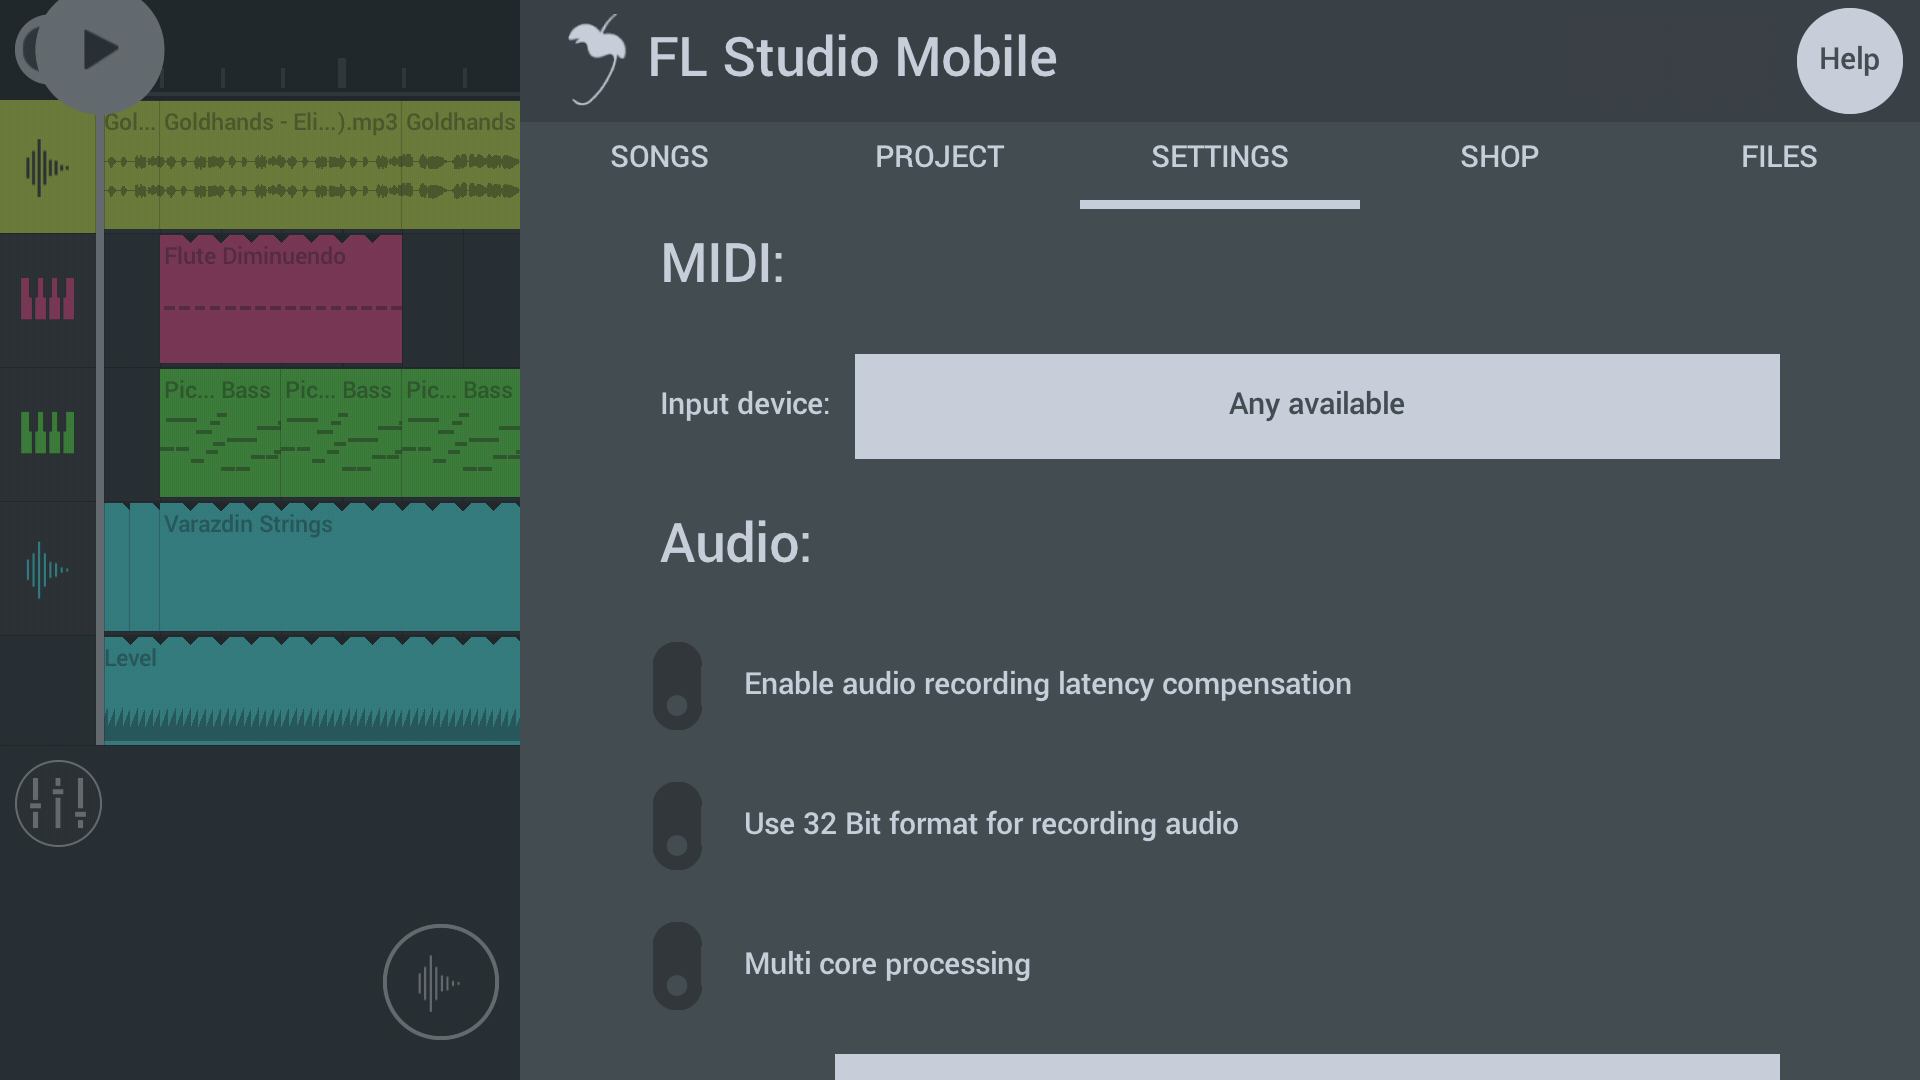 MP3 Studio: A Quick Guide On How To Use All The Features Of The